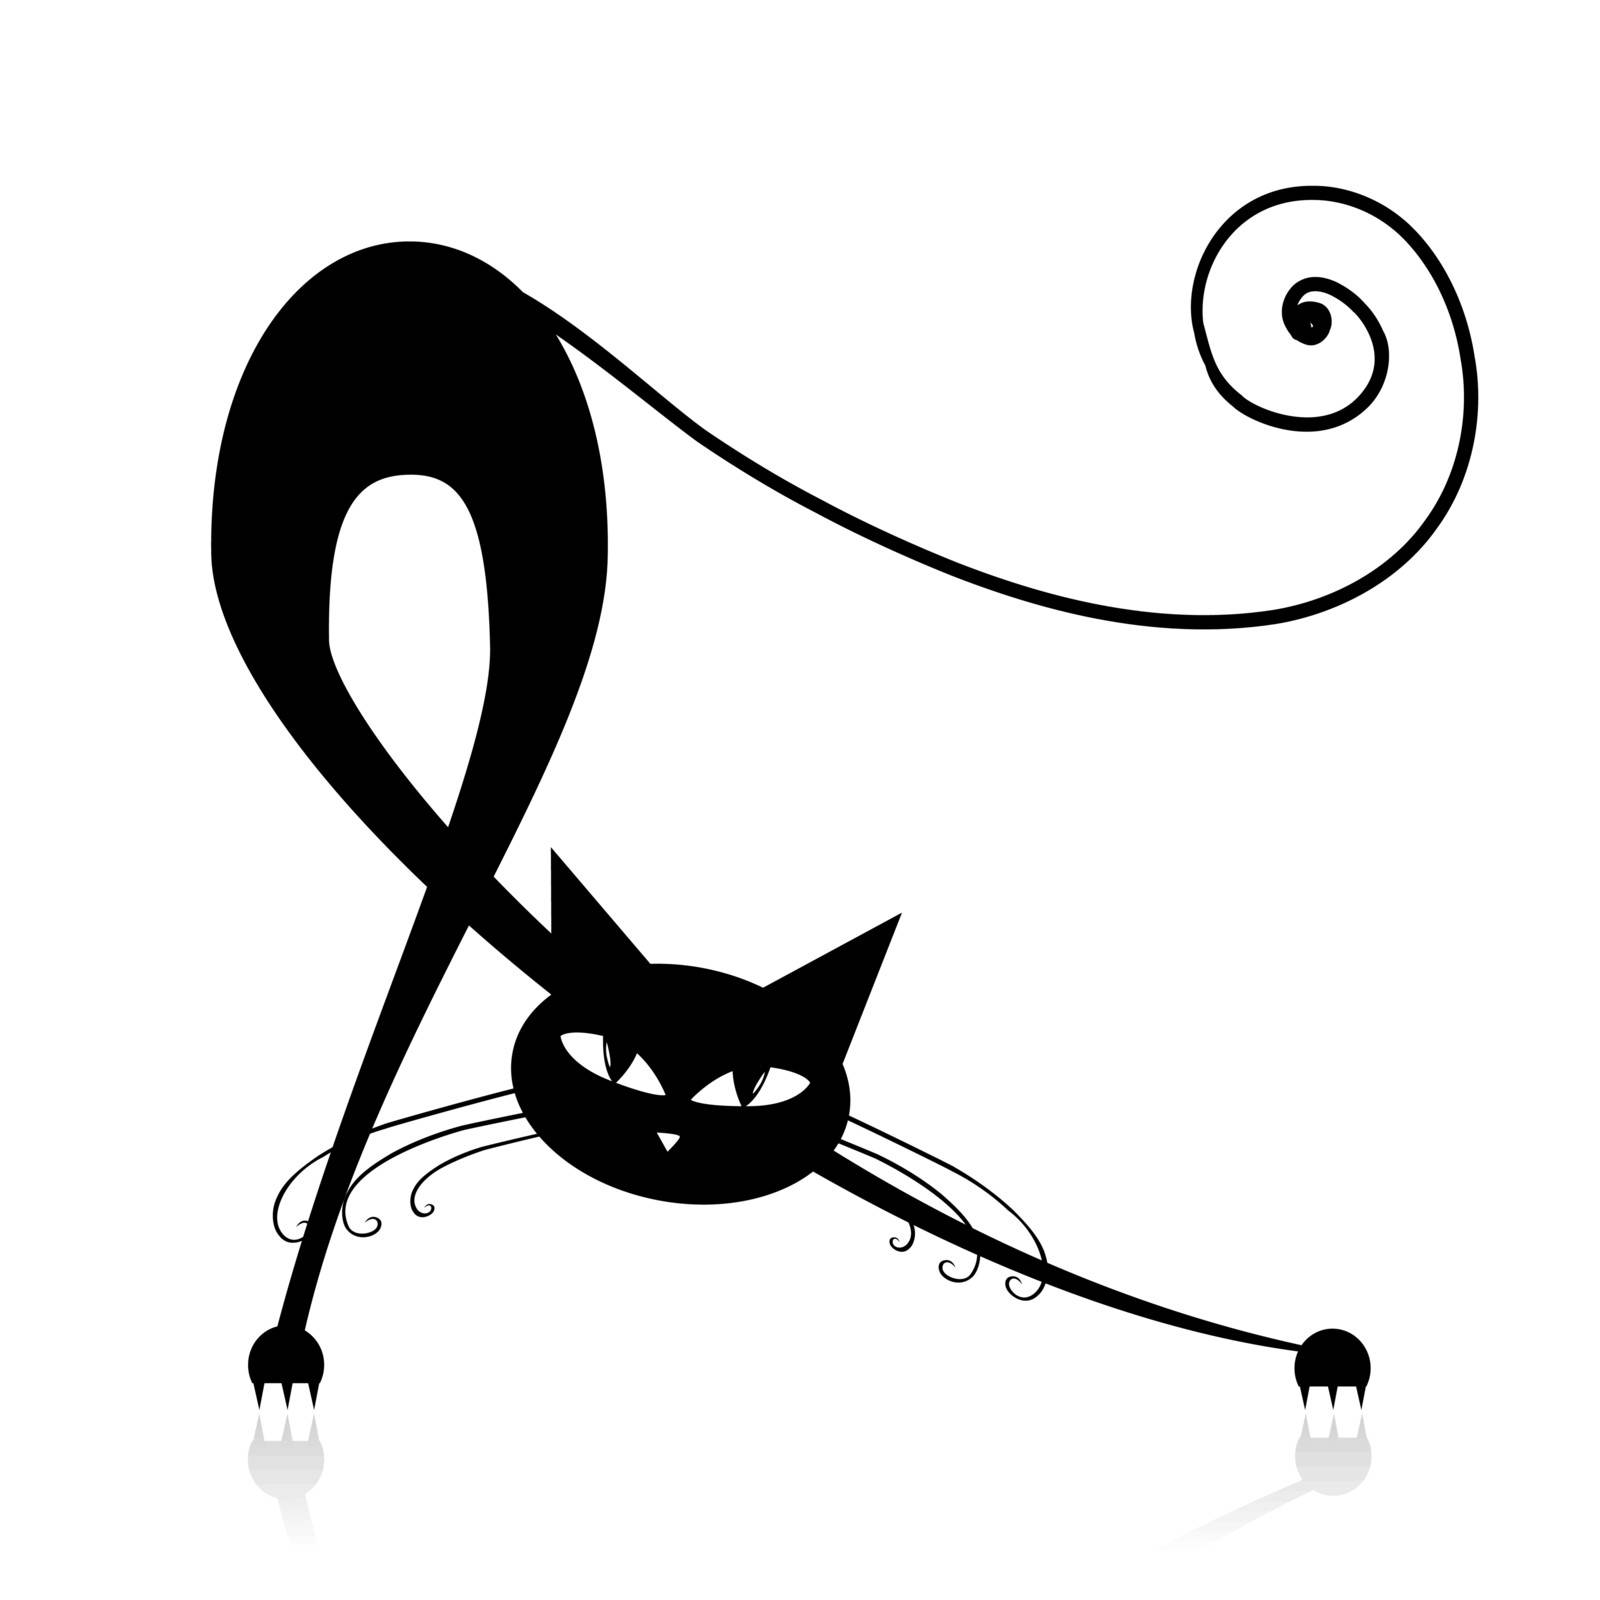 Graceful black cat silhouette for your design by Kudryashka